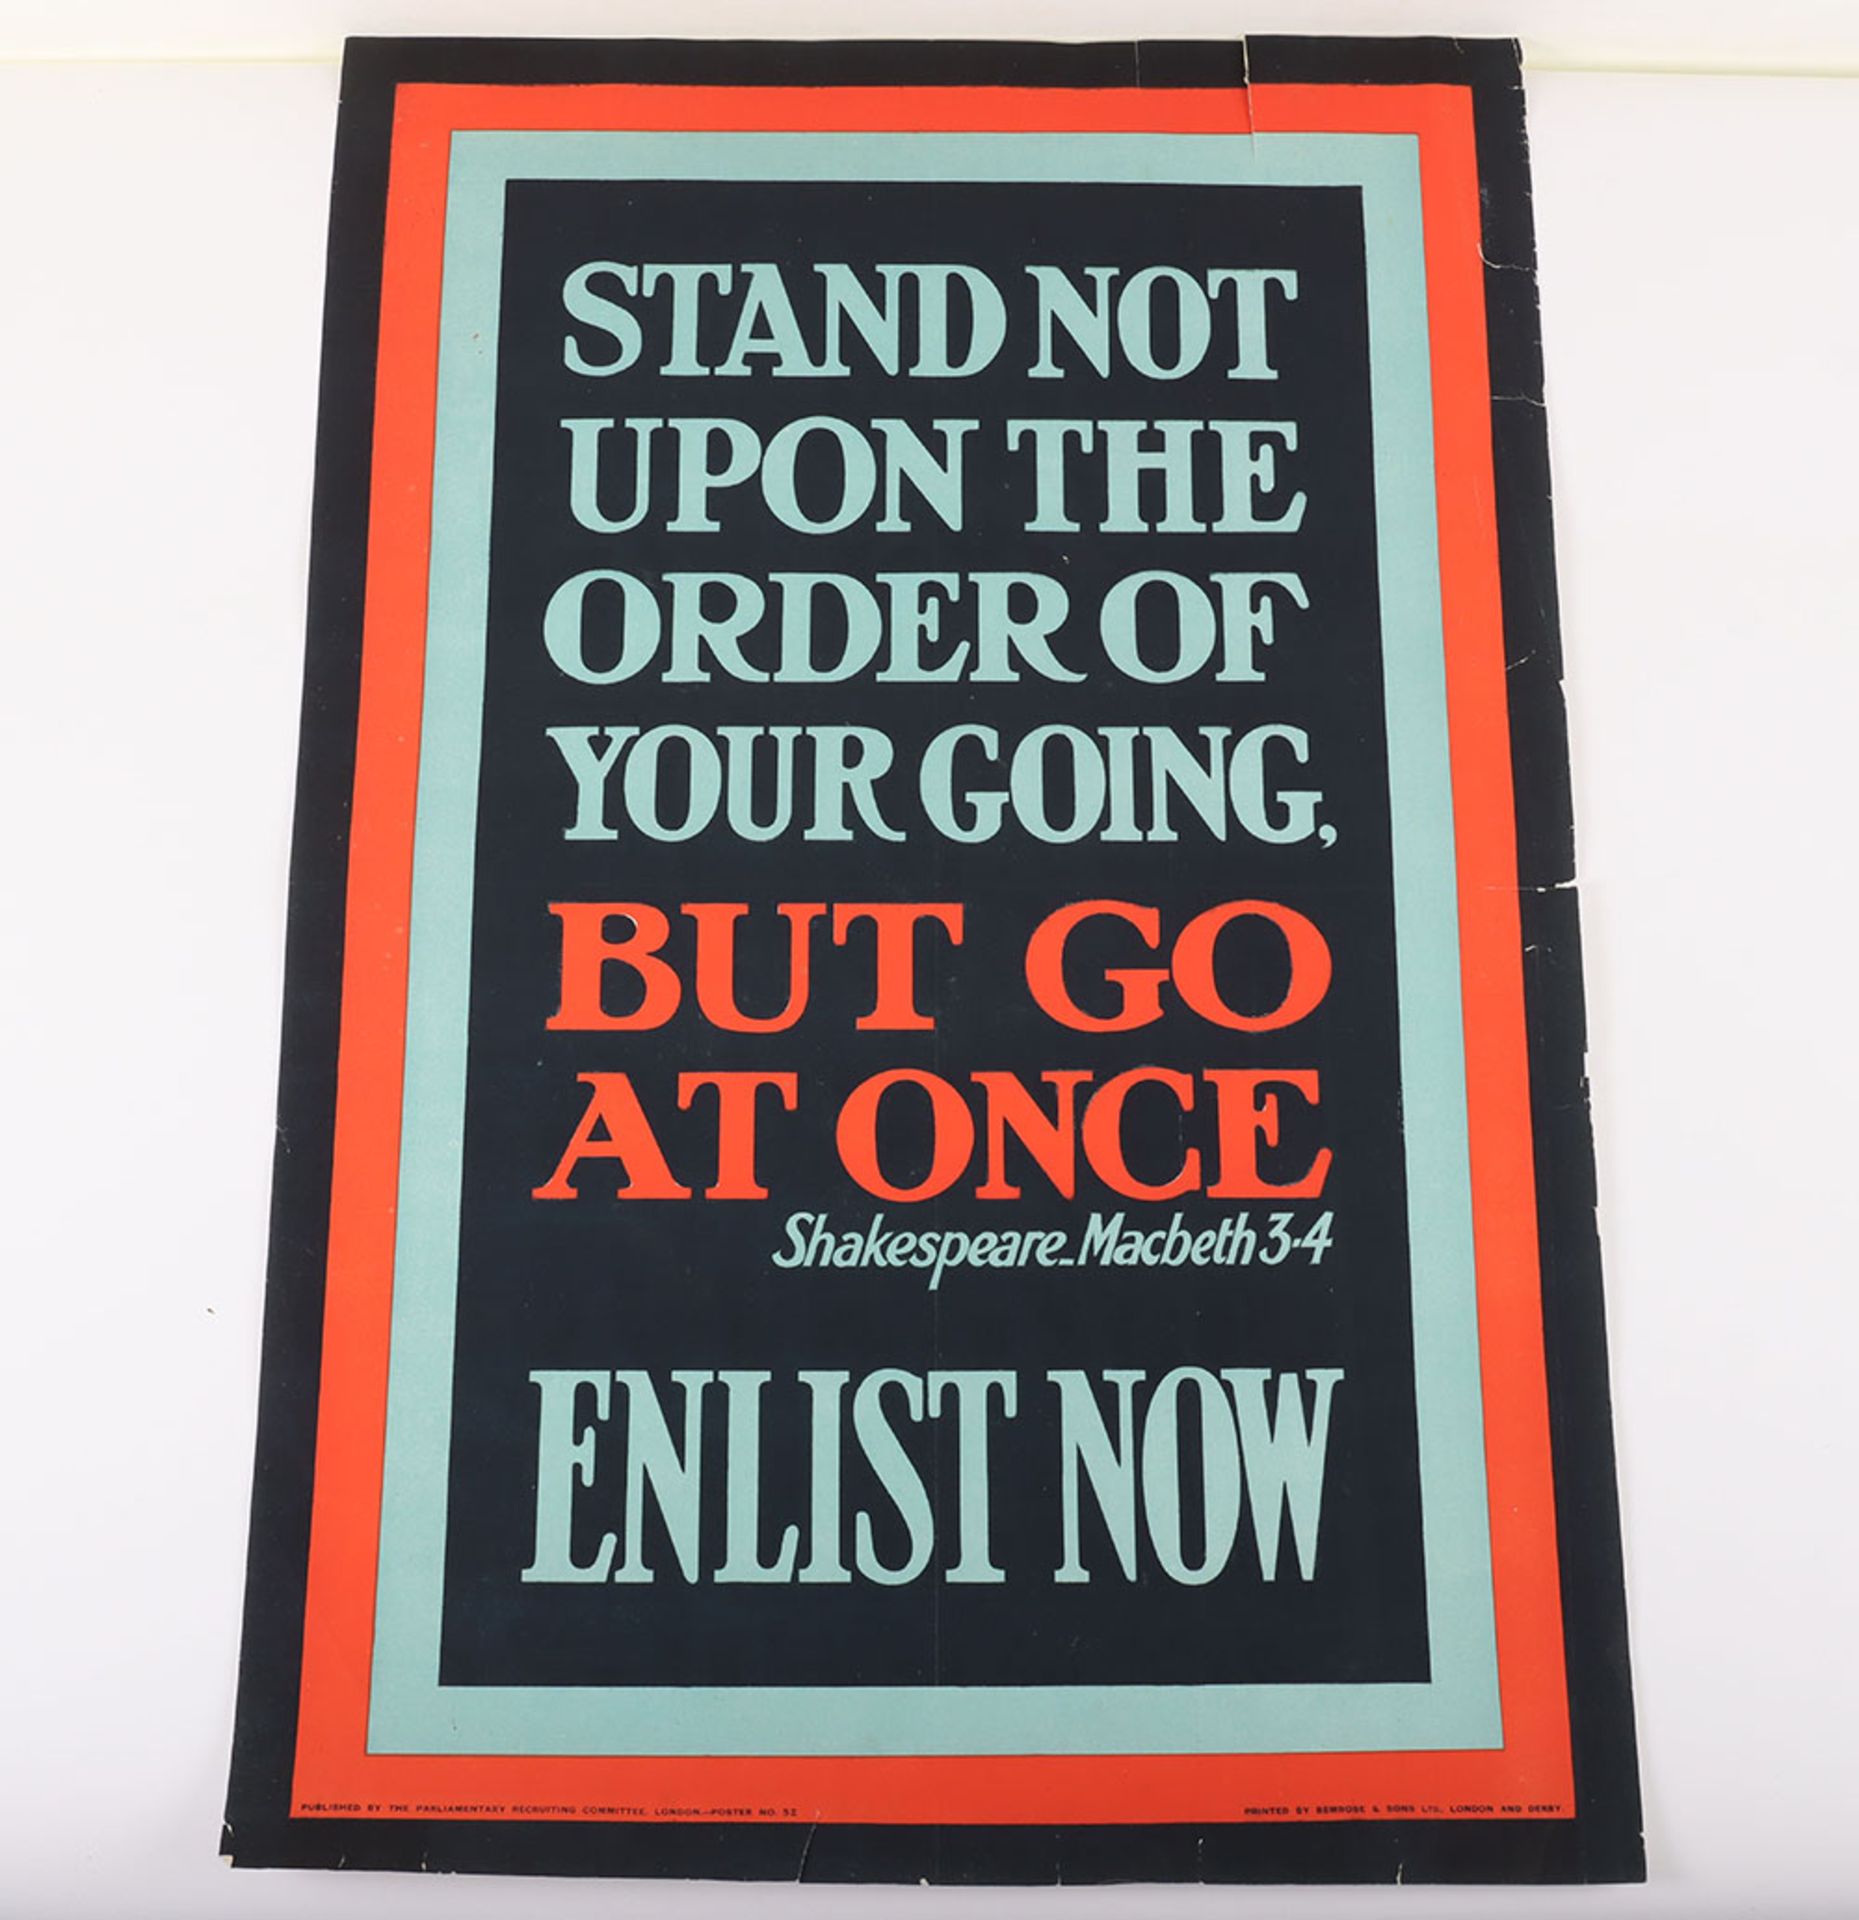 Parliamentary Enlisting Poster no 52. "But Go at Once" with Shakesperian reference